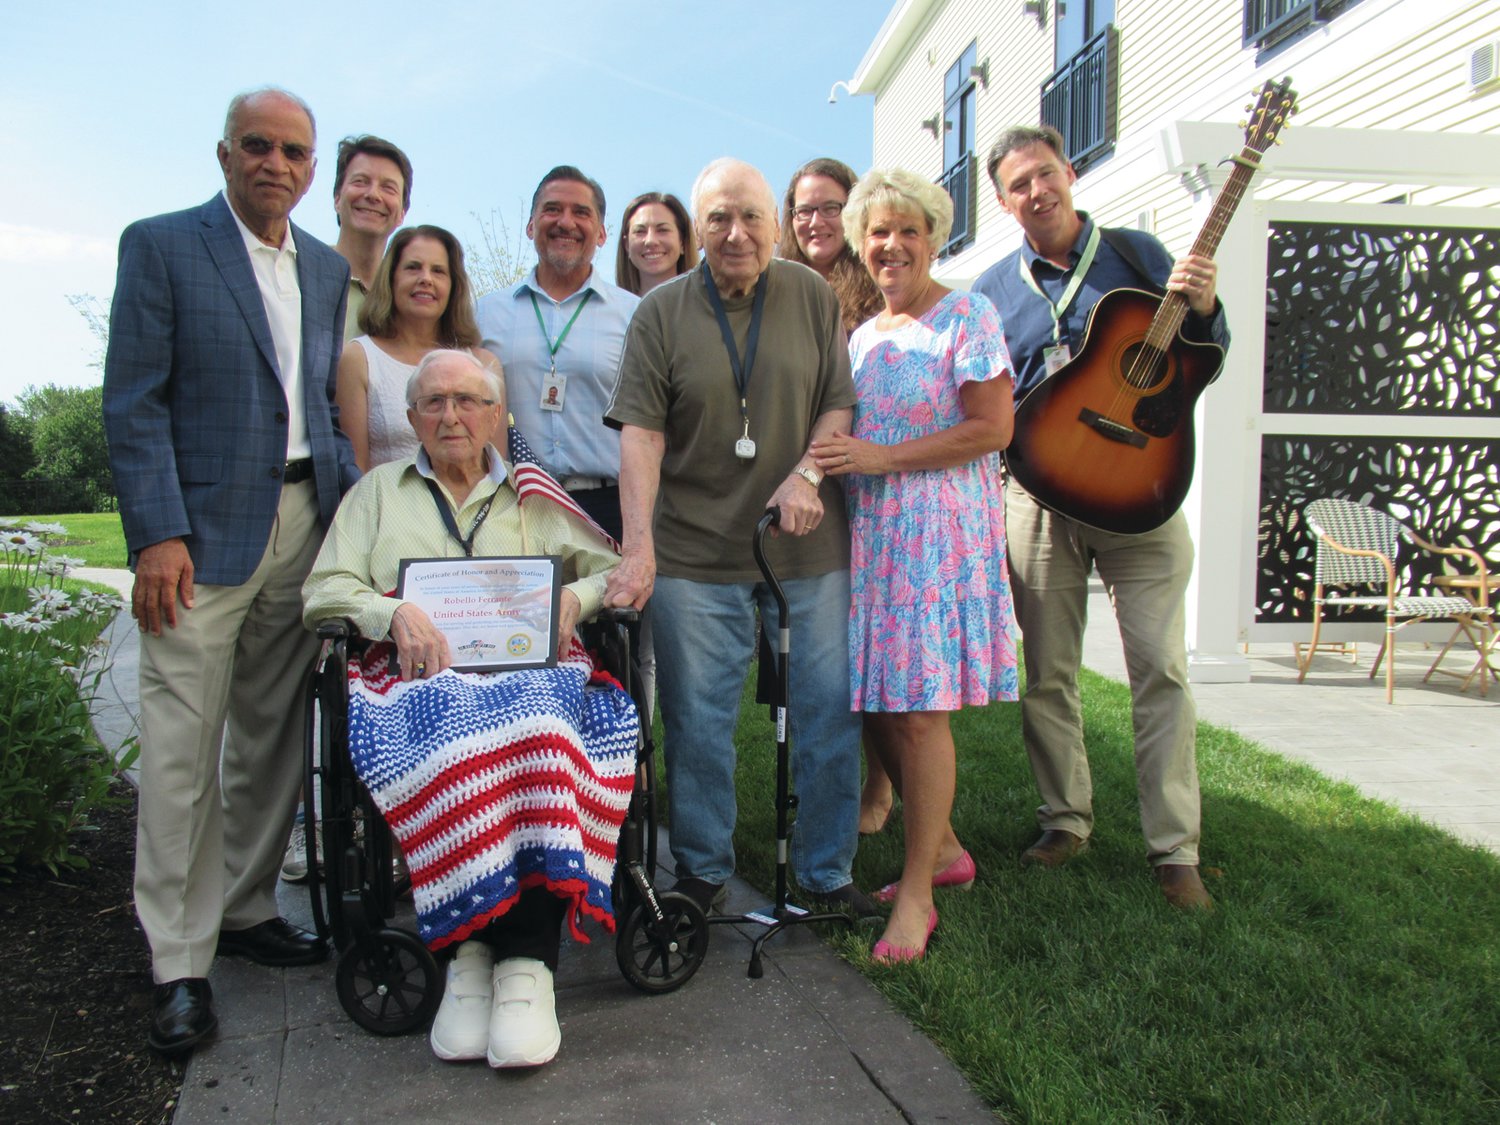 PRESERVE PALS: Akshay Talwar (left) owner of The Preserve at Briarcliffe, Maria Bermann, along with Hospice Officials surround legendary U.S. Army veteran Rebello Ferrante during a recent ceremony honoring the 98-year-old for his service to the country and successful working career.